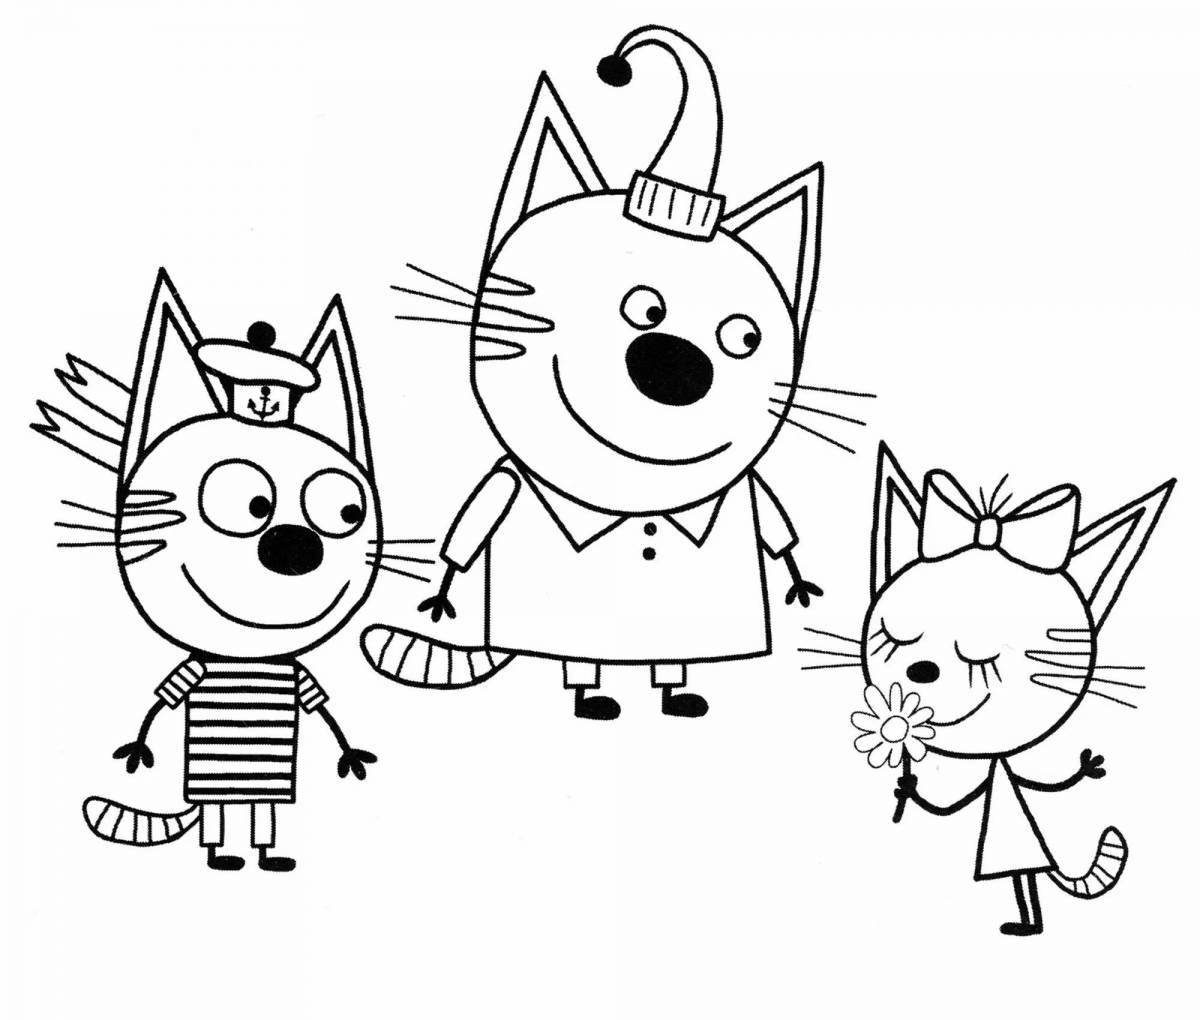 Great three kittens coloring book